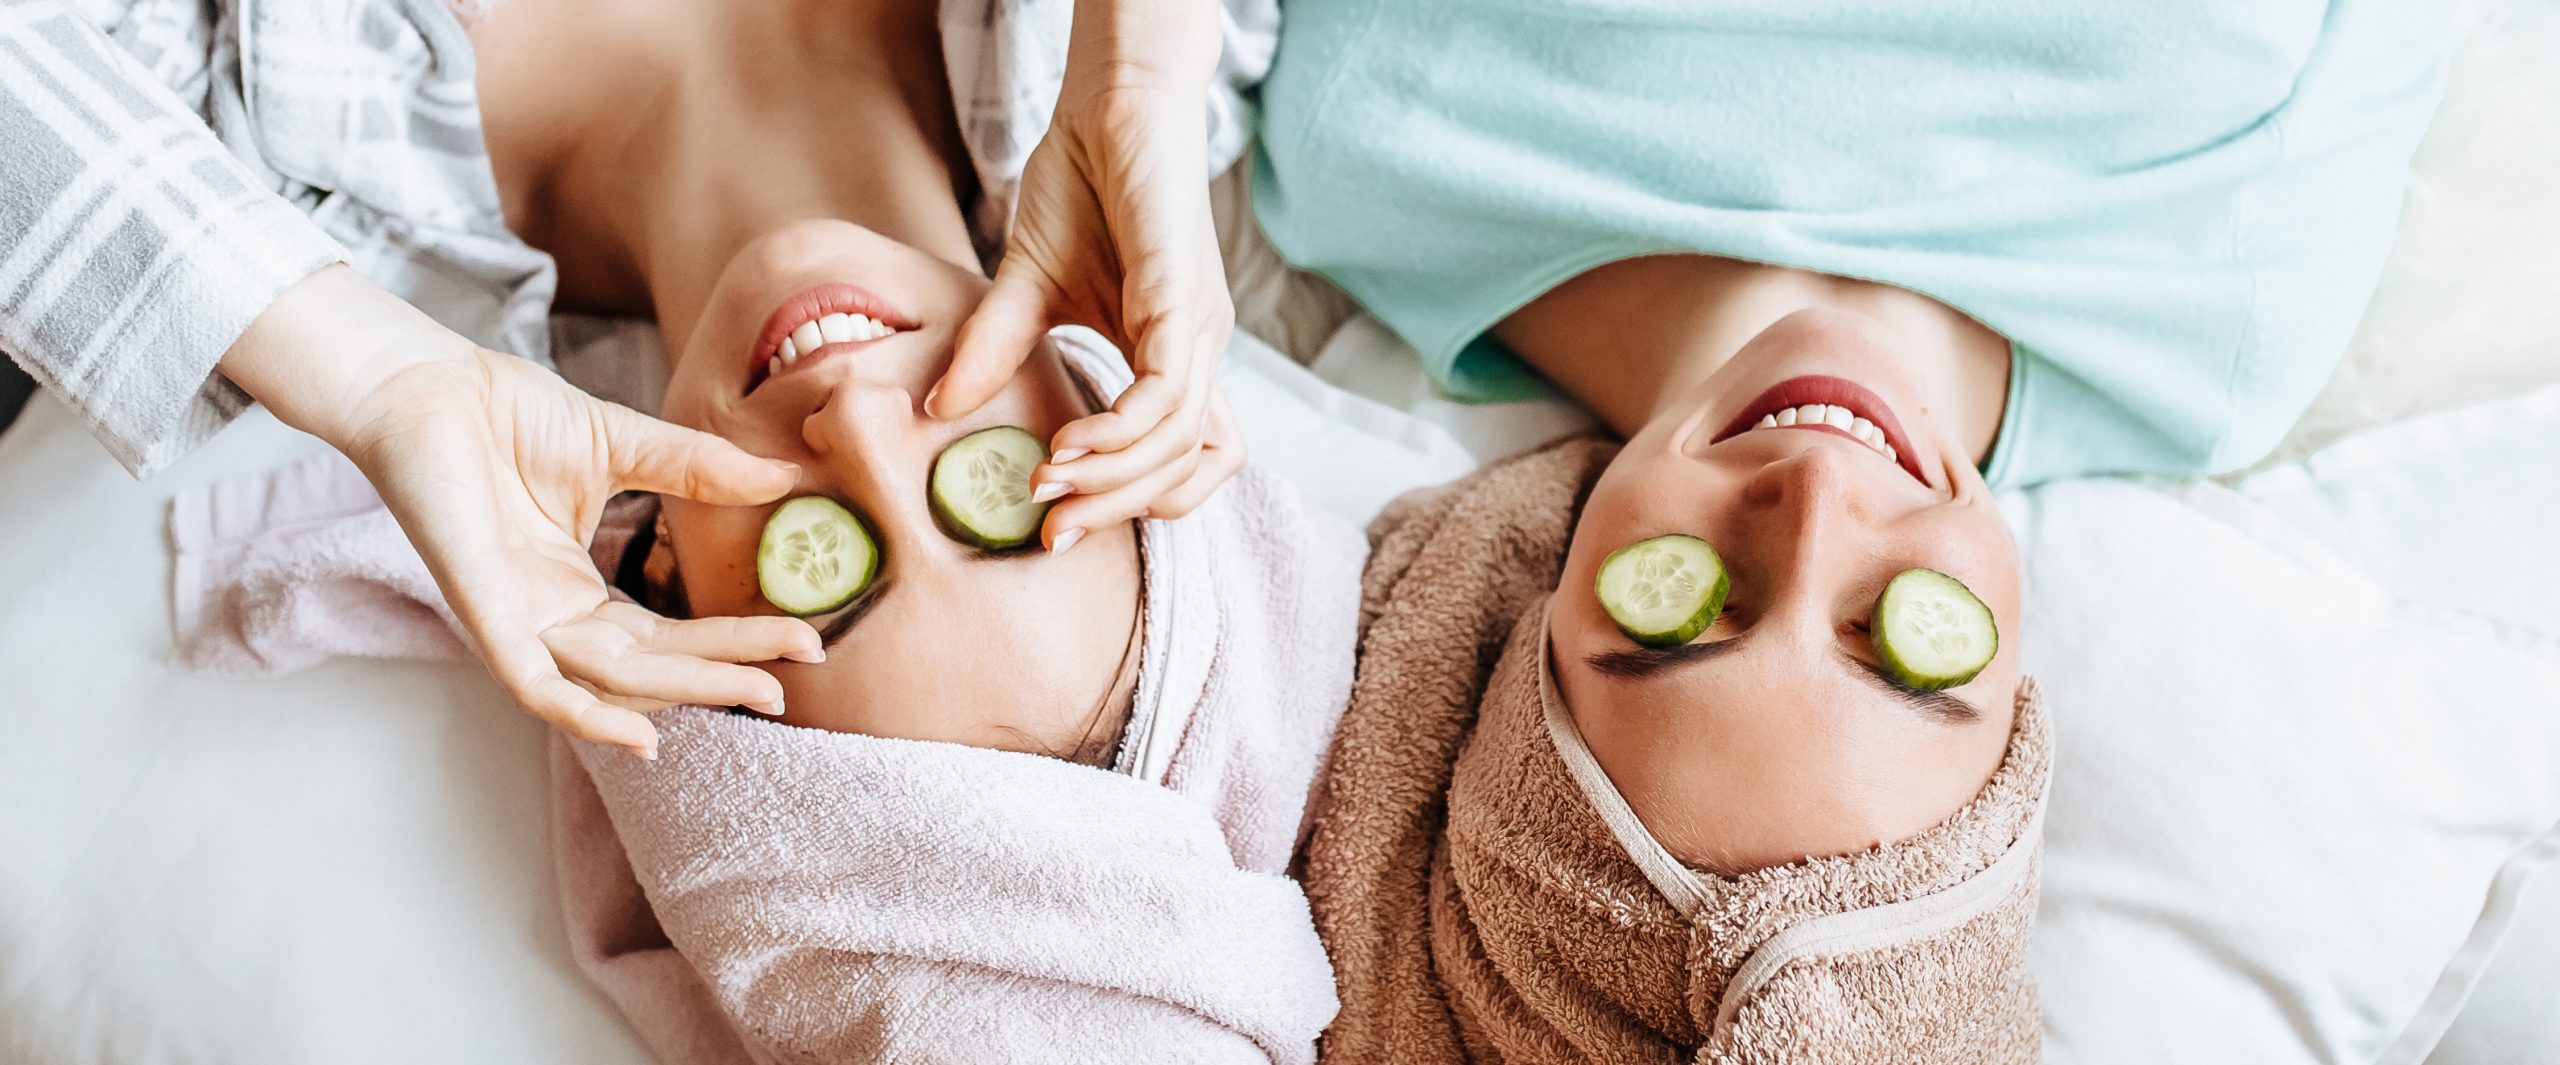 Two girls make homemade face and hair beauty masks. Cucumbers around the eyes.